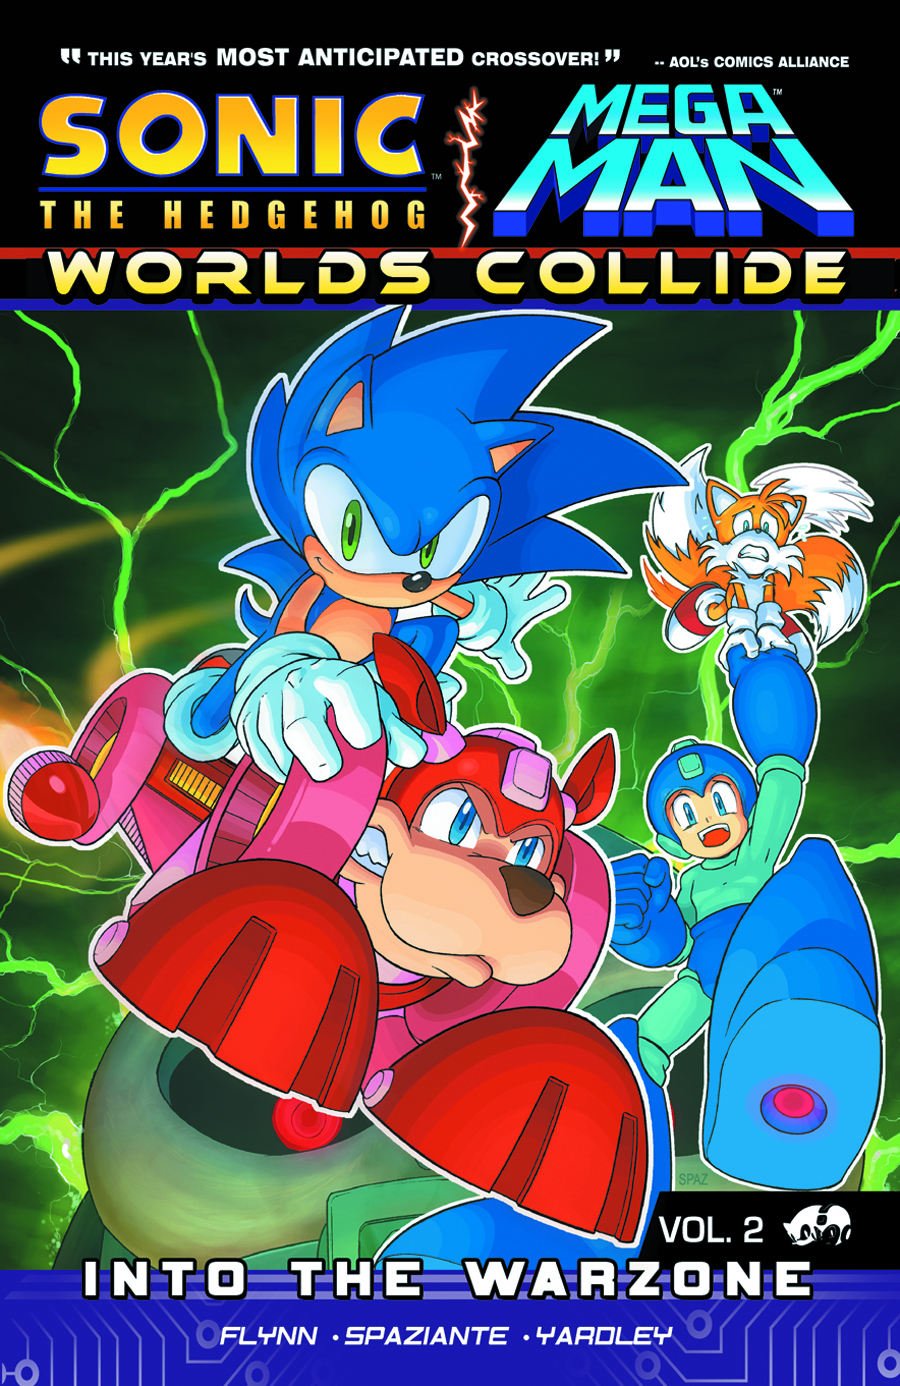 Sonic and megaman worlds collide